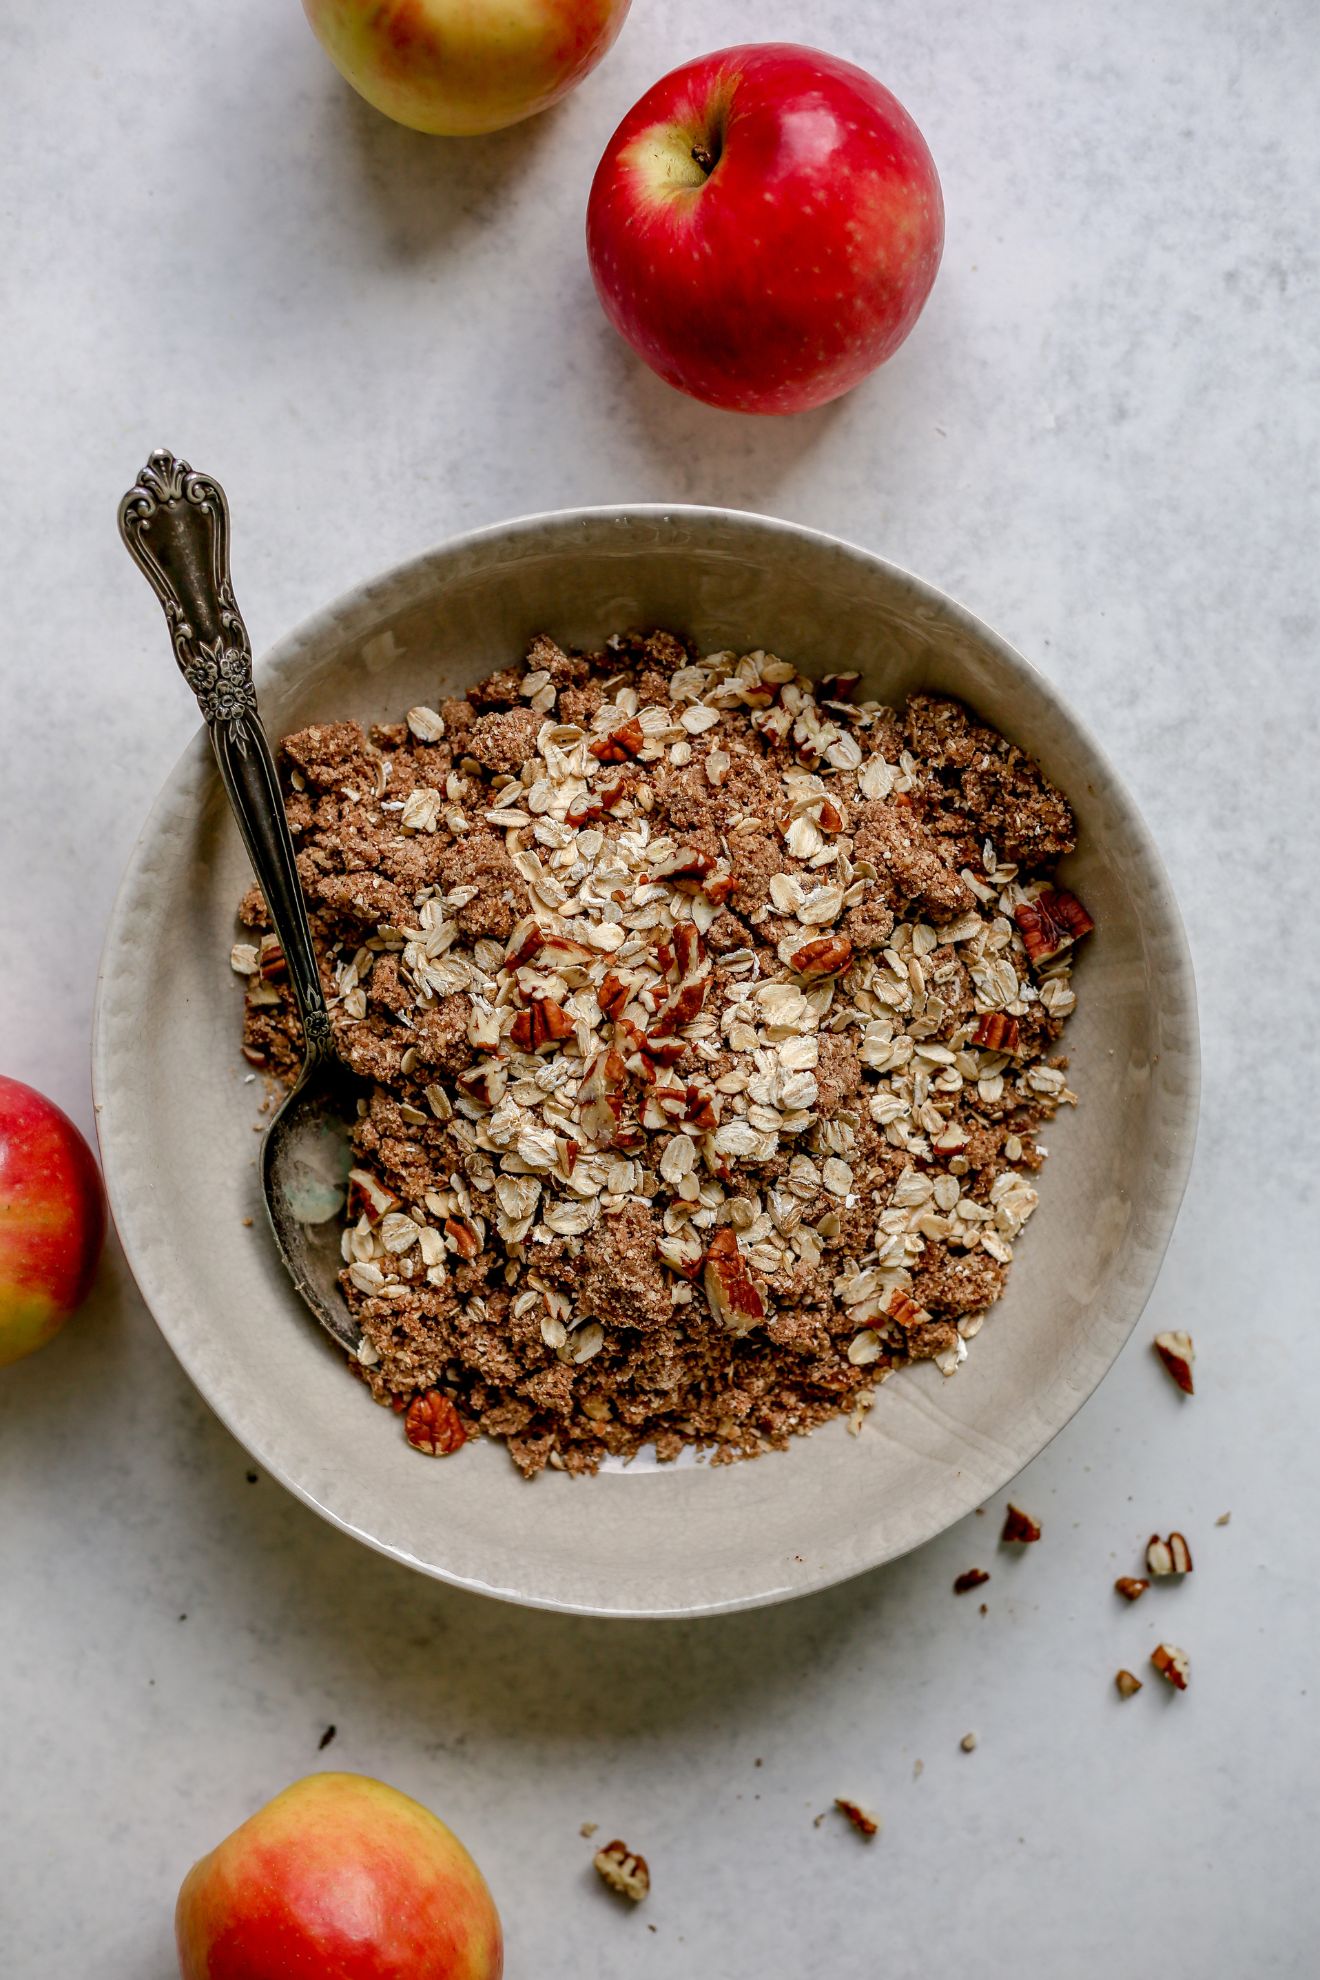 This is an overhead image of a beige bowl with an oat pecan crumble mixture in it. An antique spoon is in the bowl leaning against the side. The bowl sits on a white gray surface with apples scattered around.